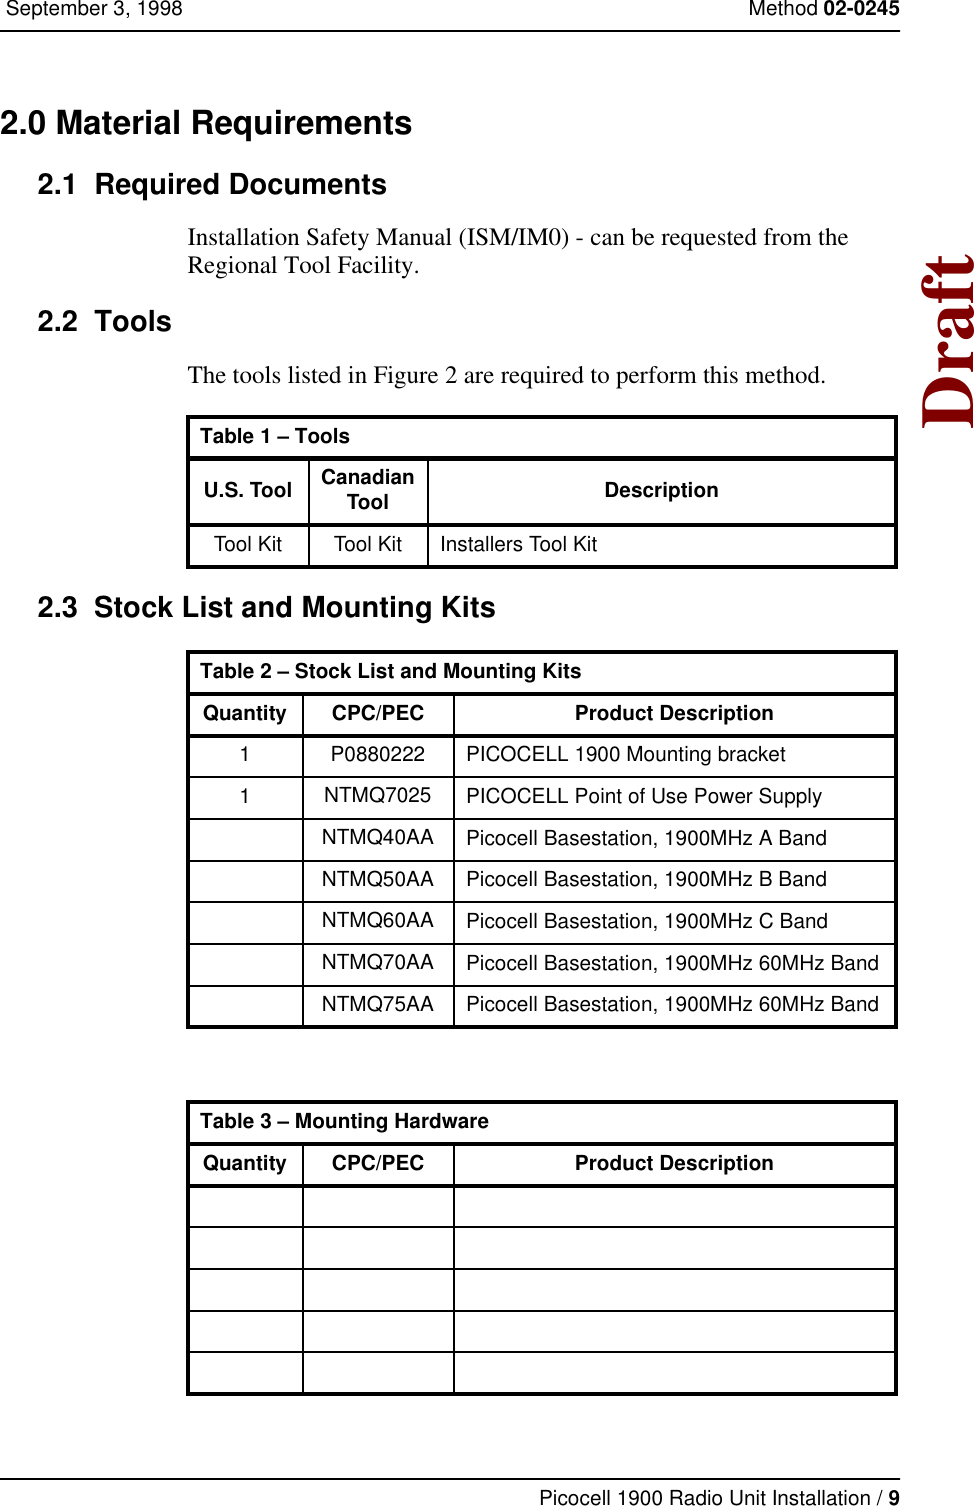 Picocell 1900 Radio Unit Installation / 9 September 3, 1998 Method 02-0245Draft2.0 Material Requirements 2.1  Required DocumentsInstallation Safety Manual (ISM/IM0) - can be requested from the Regional Tool Facility.2.2  ToolsThe tools listed in Figure 2 are required to perform this method.  2.3  Stock List and Mounting Kits  Table 1 – ToolsU.S. Tool Canadian Tool DescriptionTool Kit Tool Kit Installers Tool Kit  Table 2 – Stock List and Mounting Kits Quantity CPC/PEC Product Description1P0880222 PICOCELL 1900 Mounting bracket1NTMQ7025 PICOCELL Point of Use Power SupplyNTMQ40AA Picocell Basestation, 1900MHz A BandNTMQ50AA Picocell Basestation, 1900MHz B BandNTMQ60AA Picocell Basestation, 1900MHz C BandNTMQ70AA Picocell Basestation, 1900MHz 60MHz BandNTMQ75AA Picocell Basestation, 1900MHz 60MHz BandTable 3 – Mounting Hardware Quantity CPC/PEC Product Description